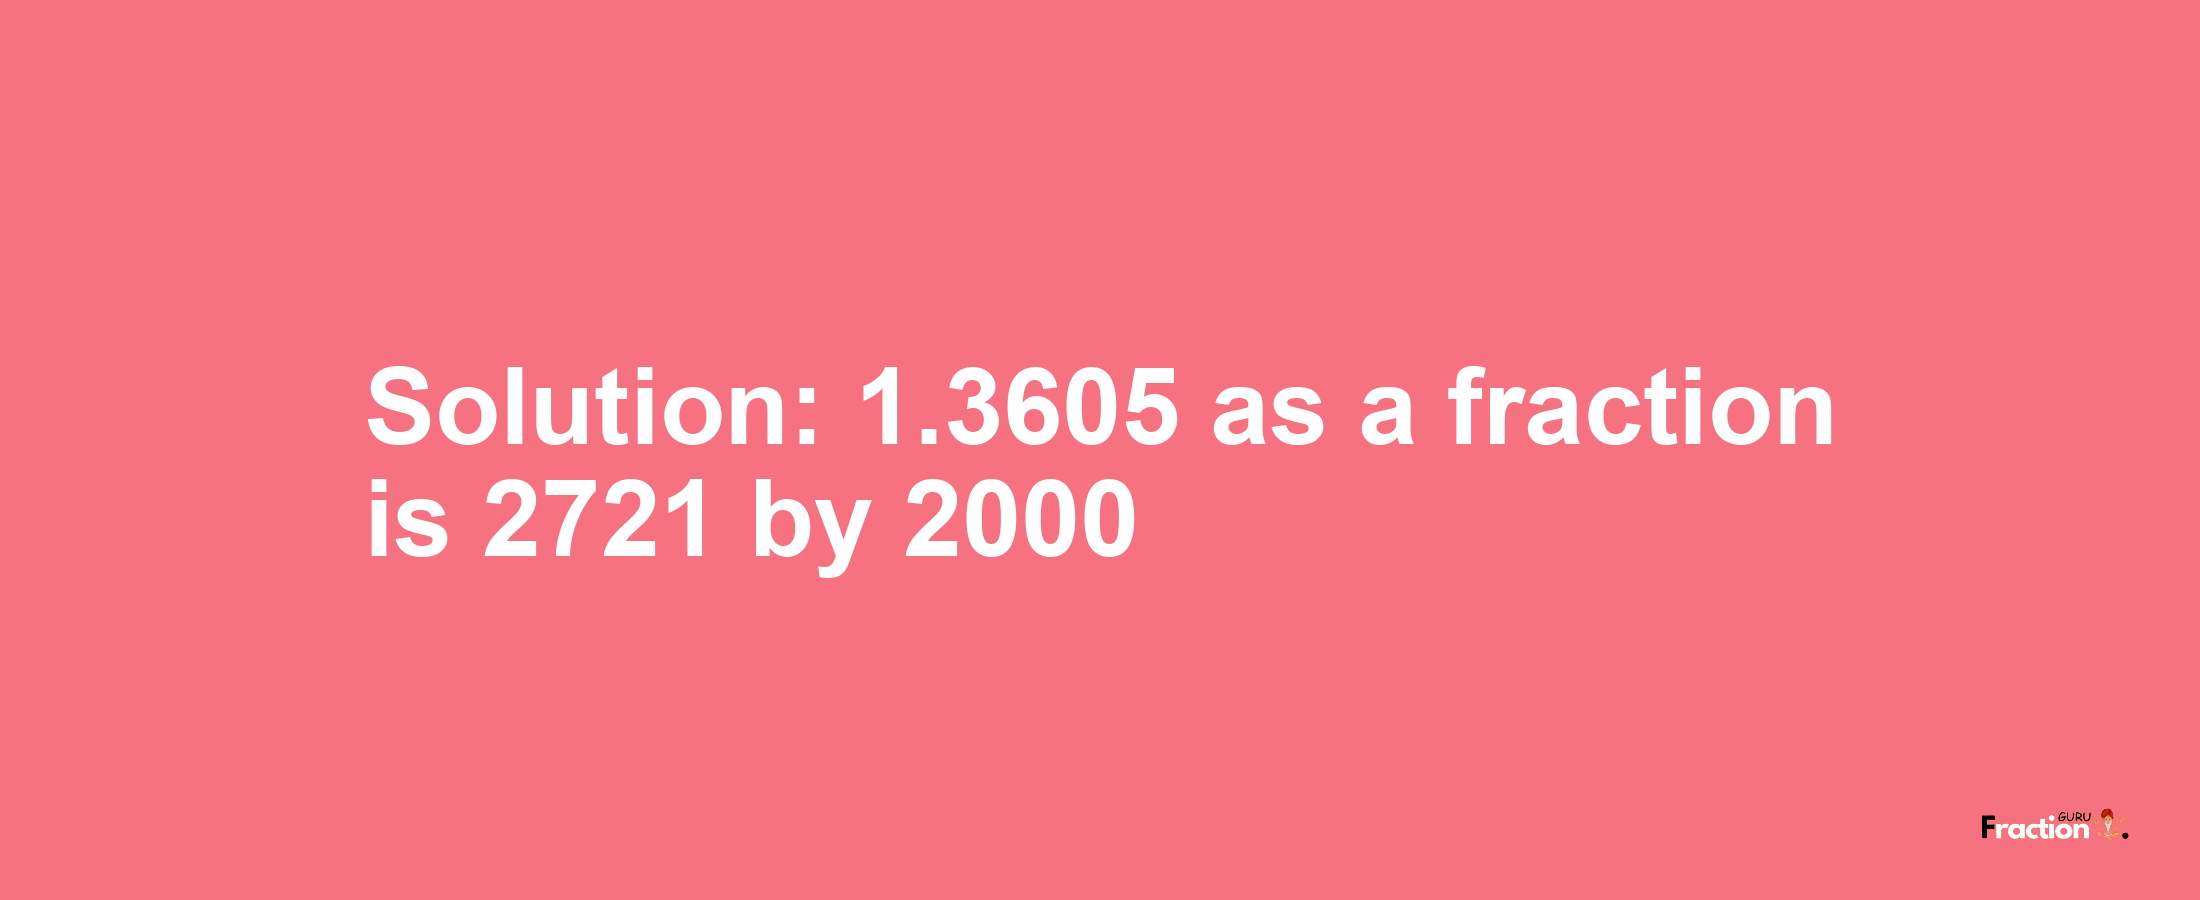 Solution:1.3605 as a fraction is 2721/2000